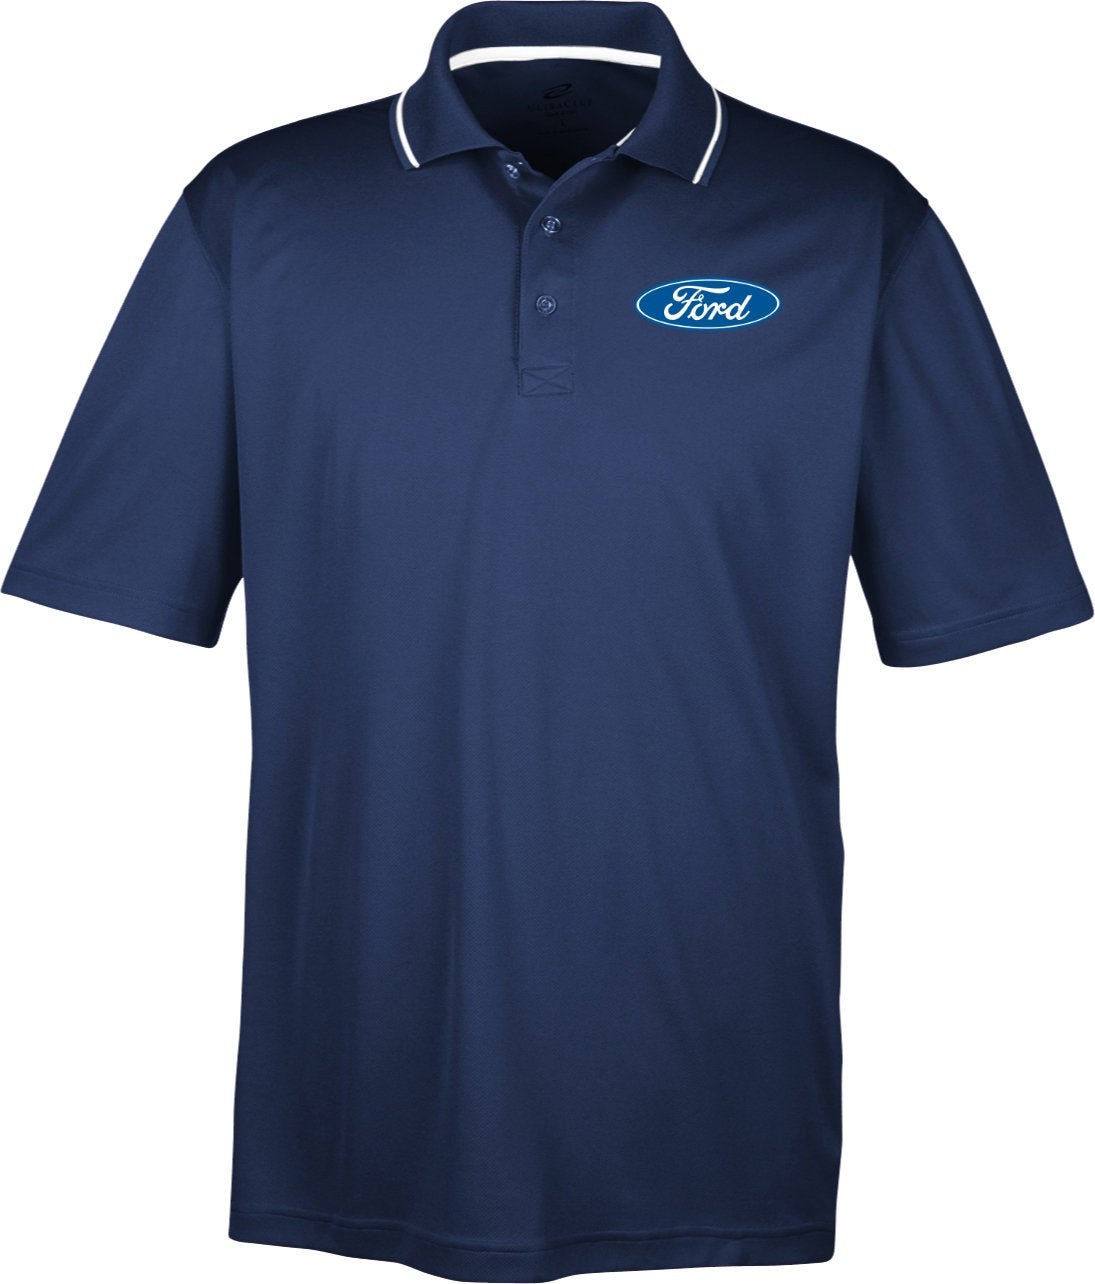 Ford Oval Pocket Print Men's Cool & Dry Two Tone Polo | Etsy